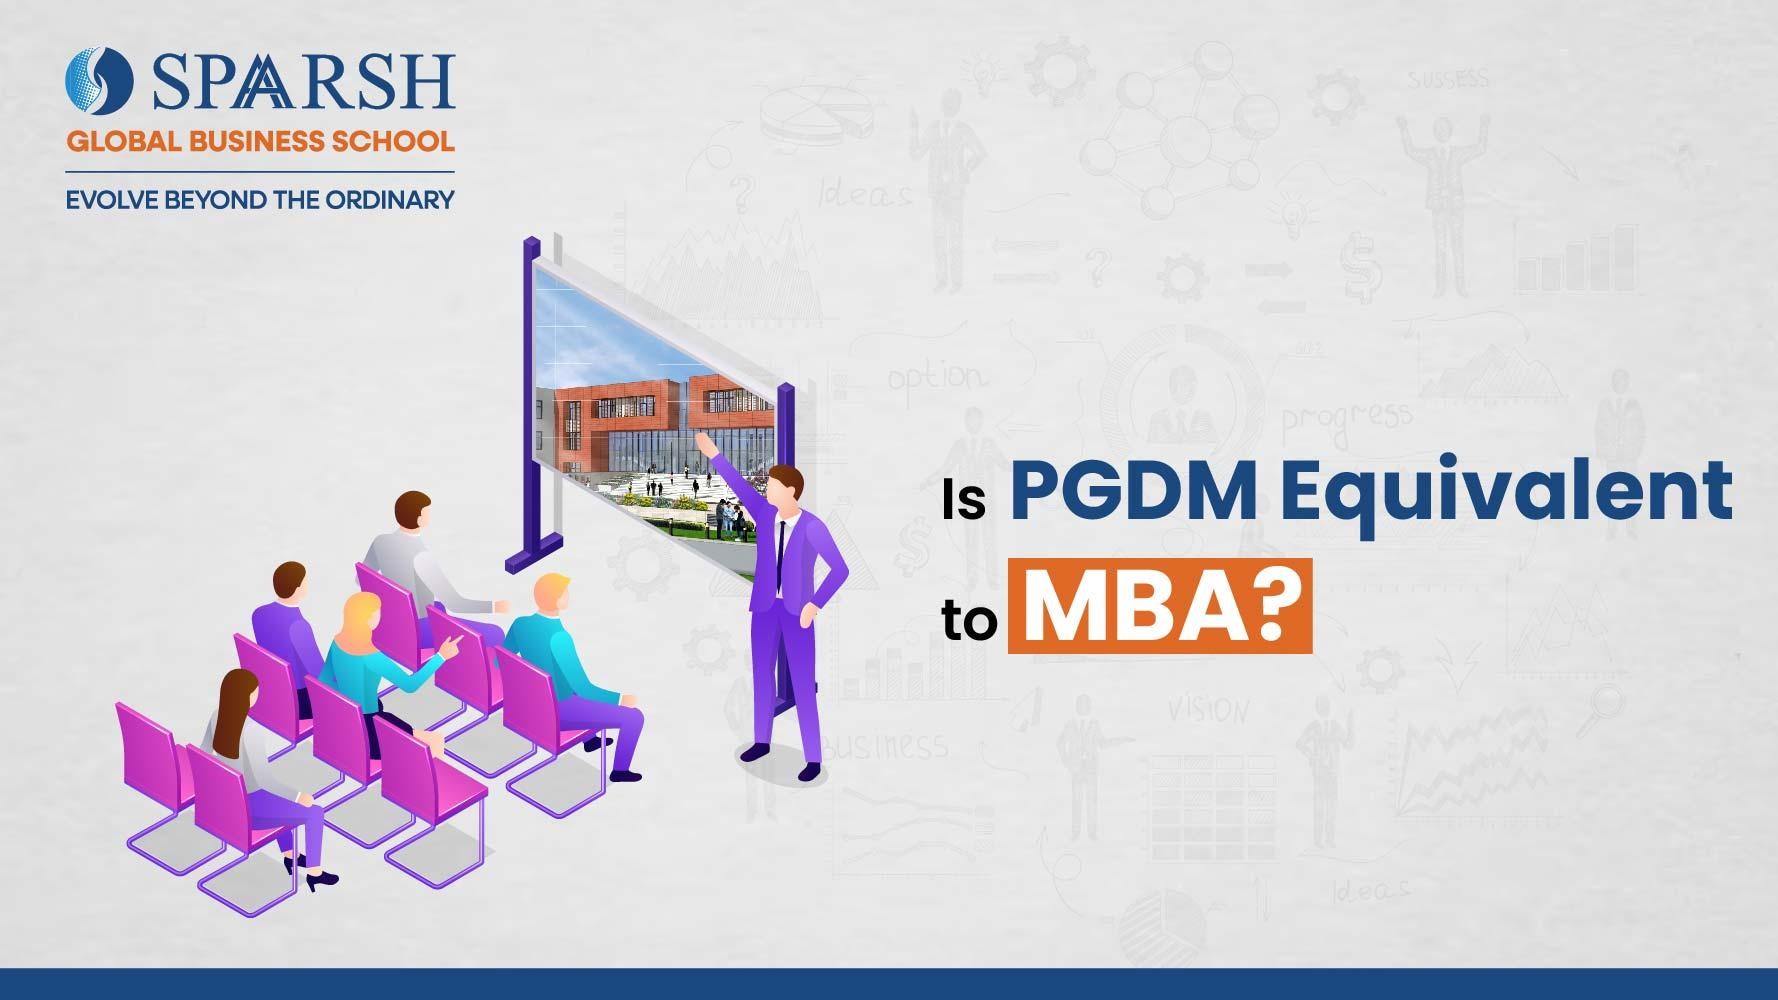 Is PGDM Equivalent to an MBA?